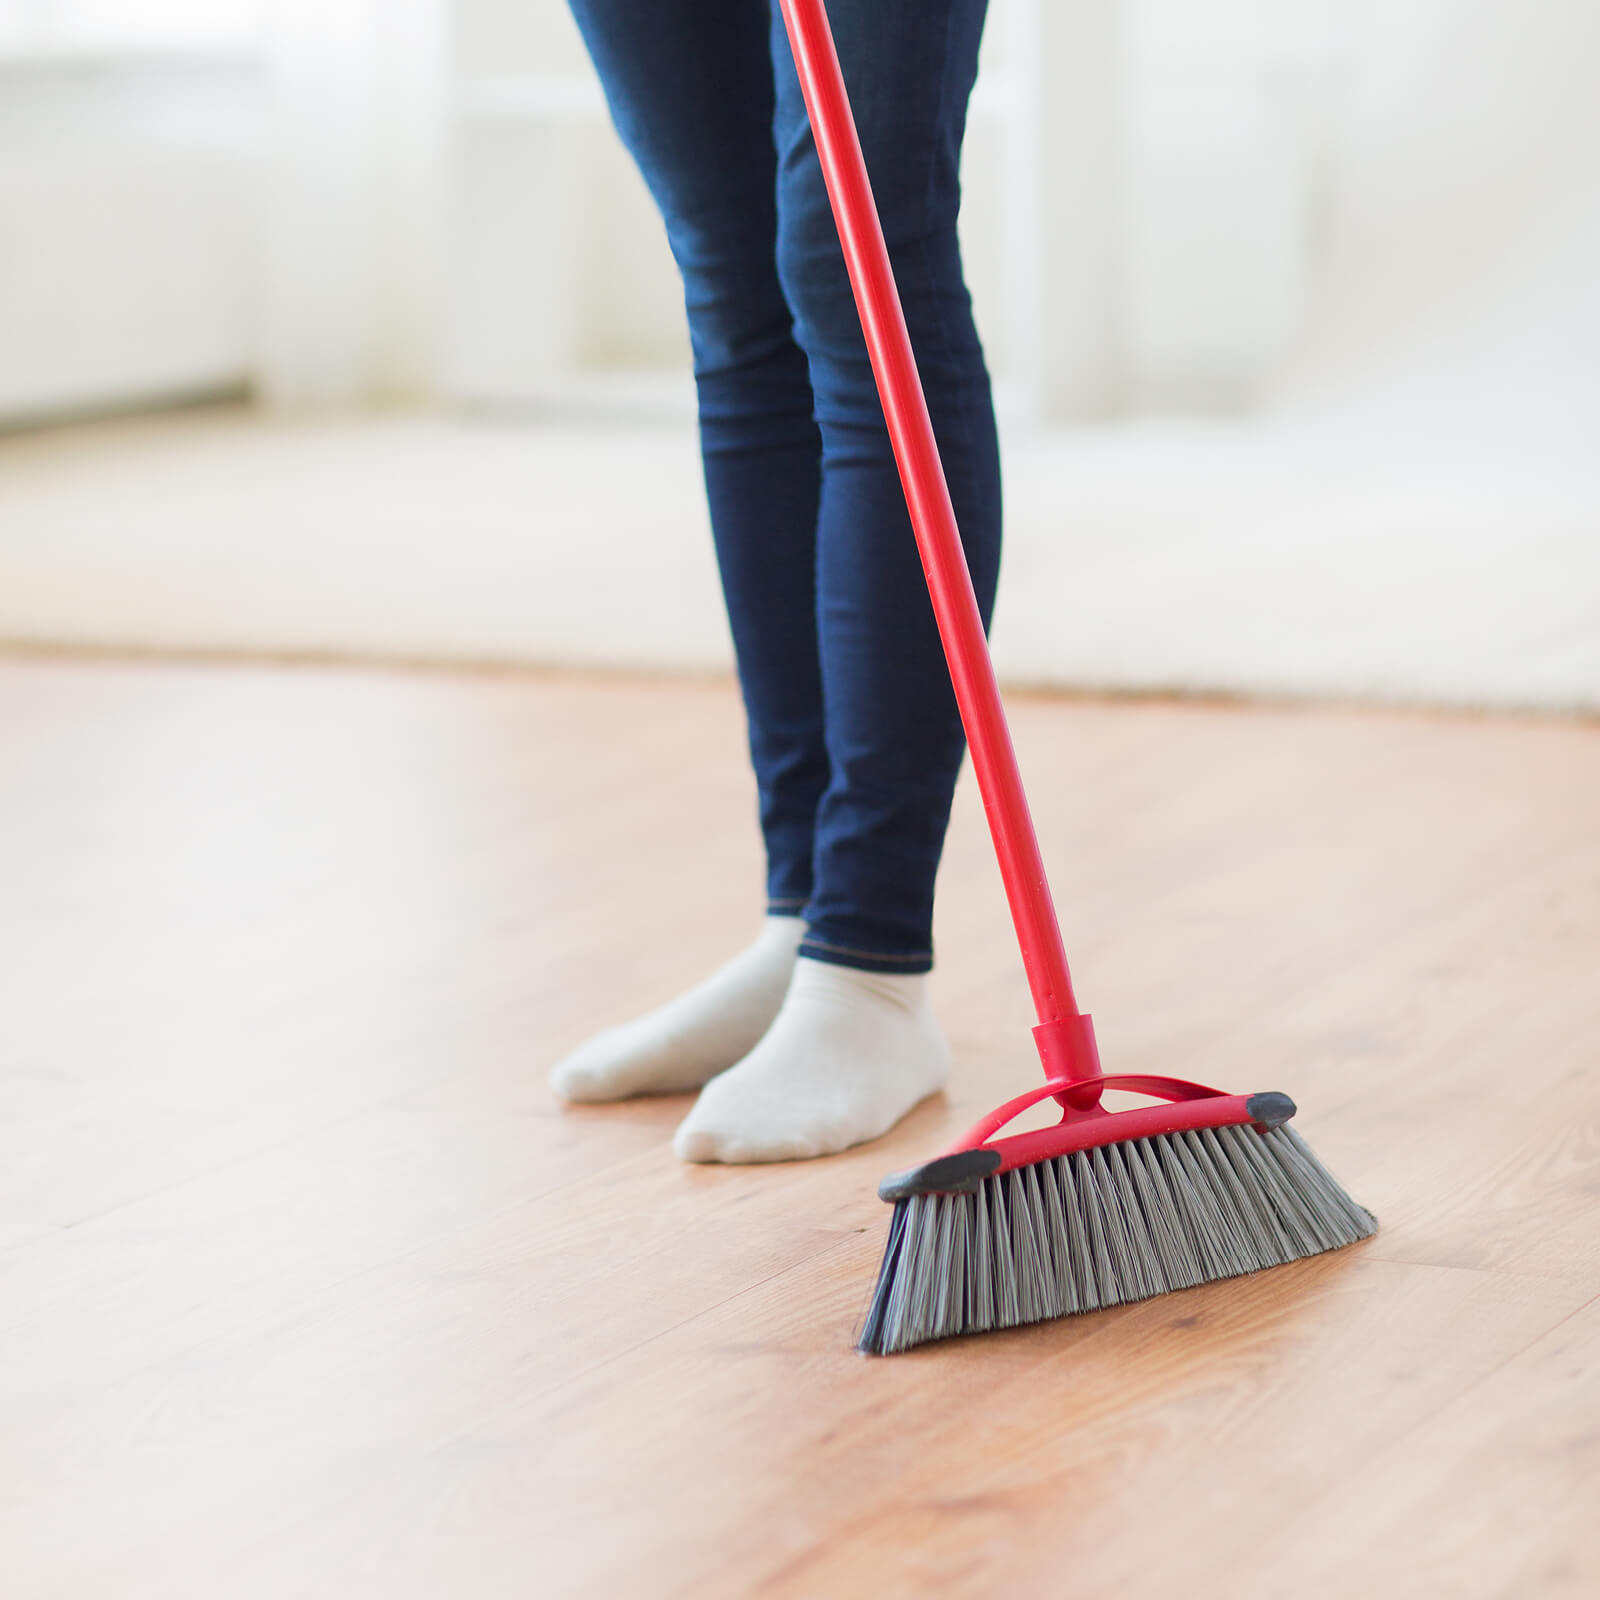 Laminate floor cleaning | Carpets To Go